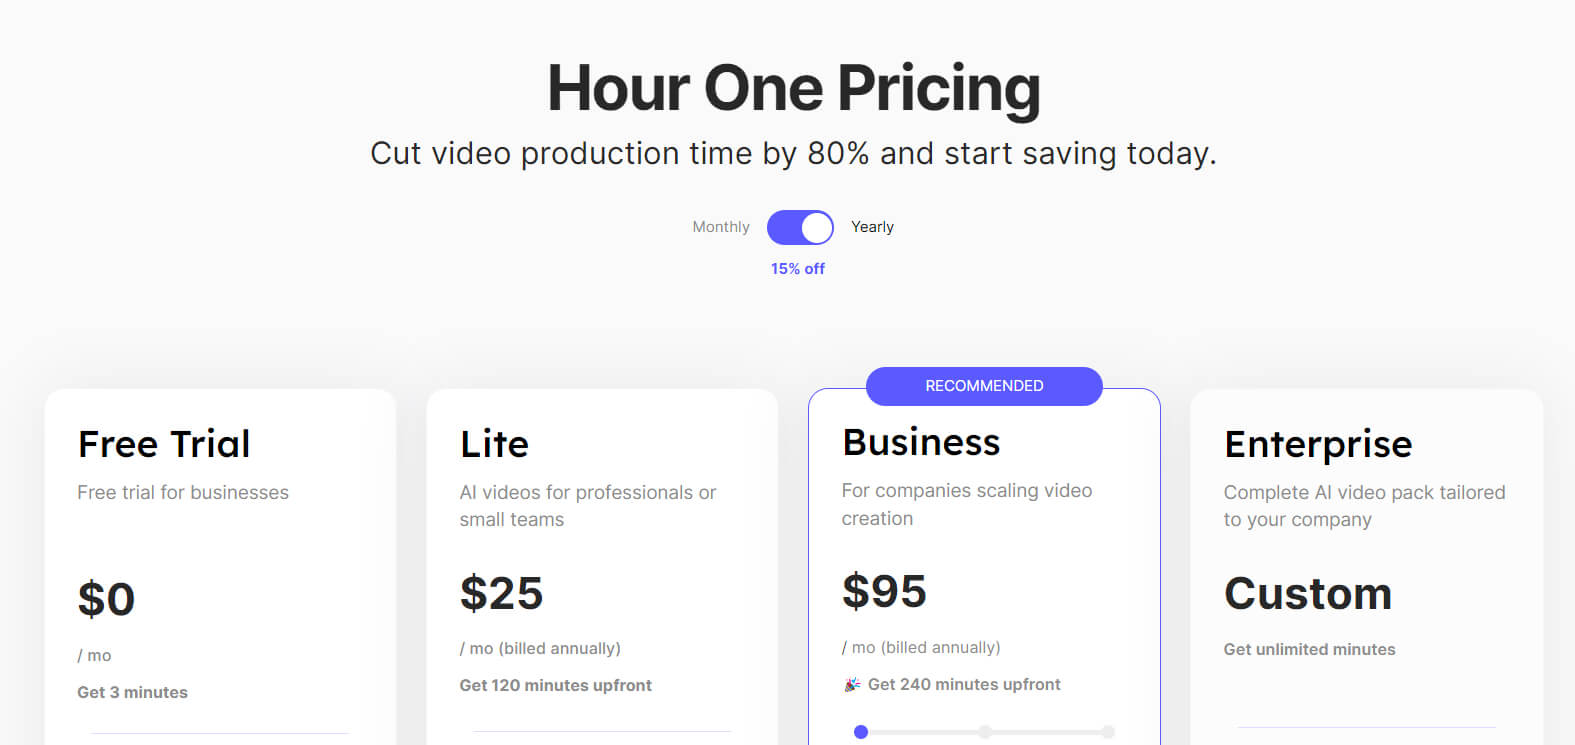 pictorial-presentation-of-hour-one-pricing-plans-for-users-in-